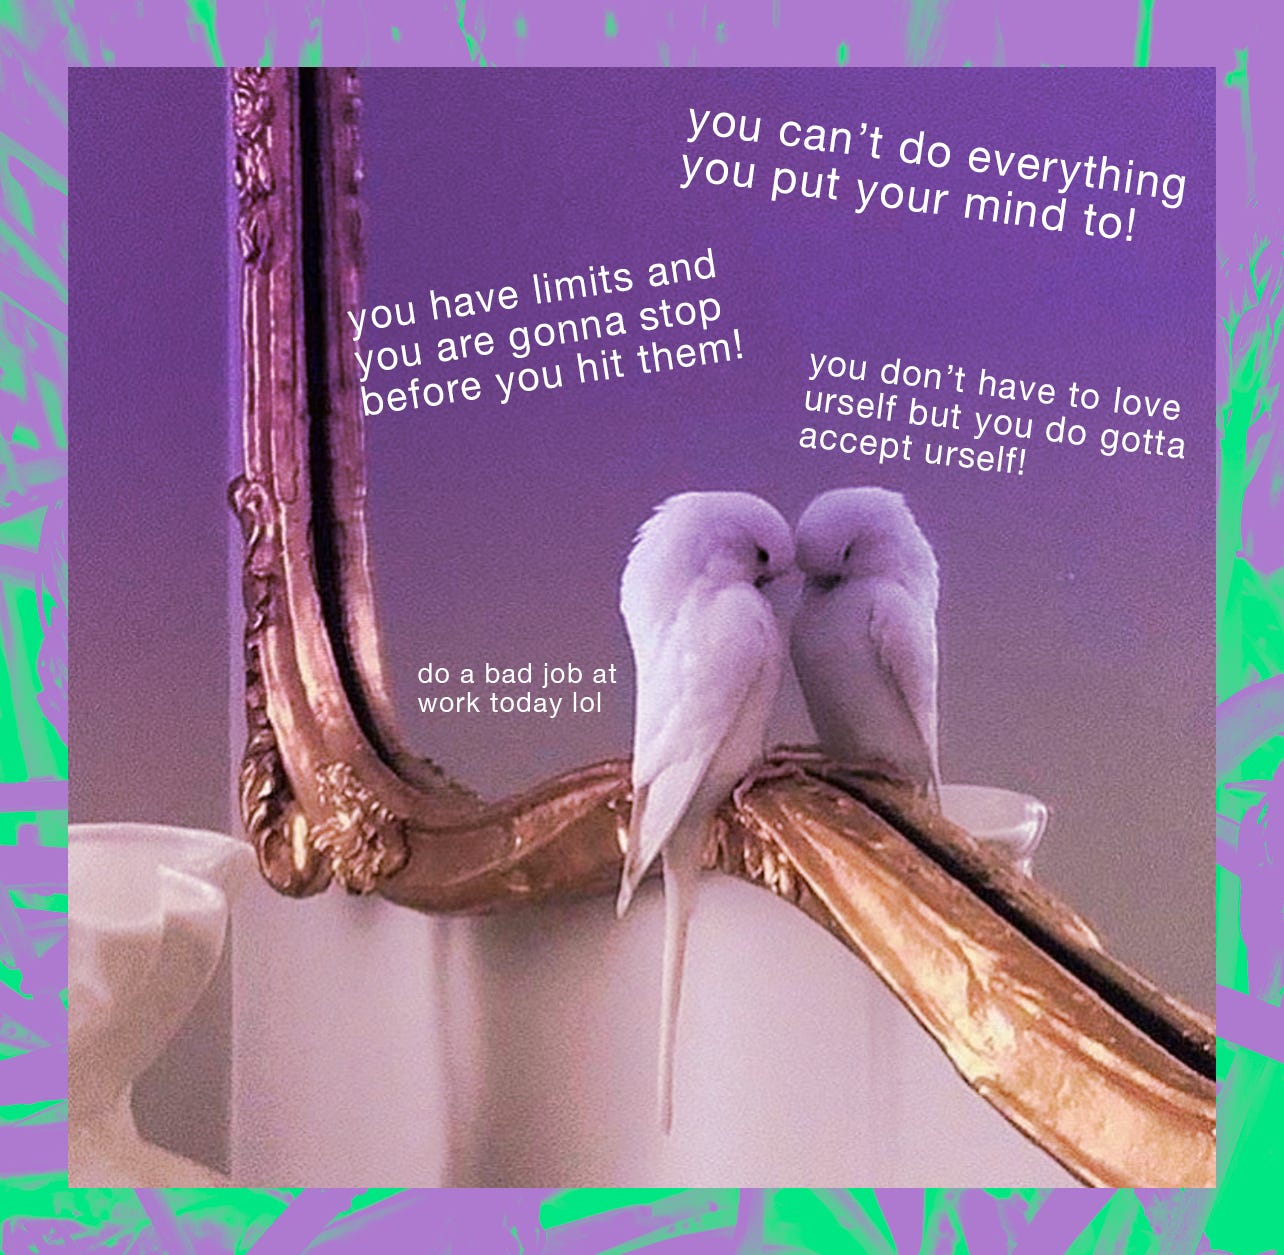 a meme of a bird looking into a mirror who appears to be giving himself a pep talk except it says things like "you have limits and you are gonna stop before you hit them" and "do a bad job at work today lol"